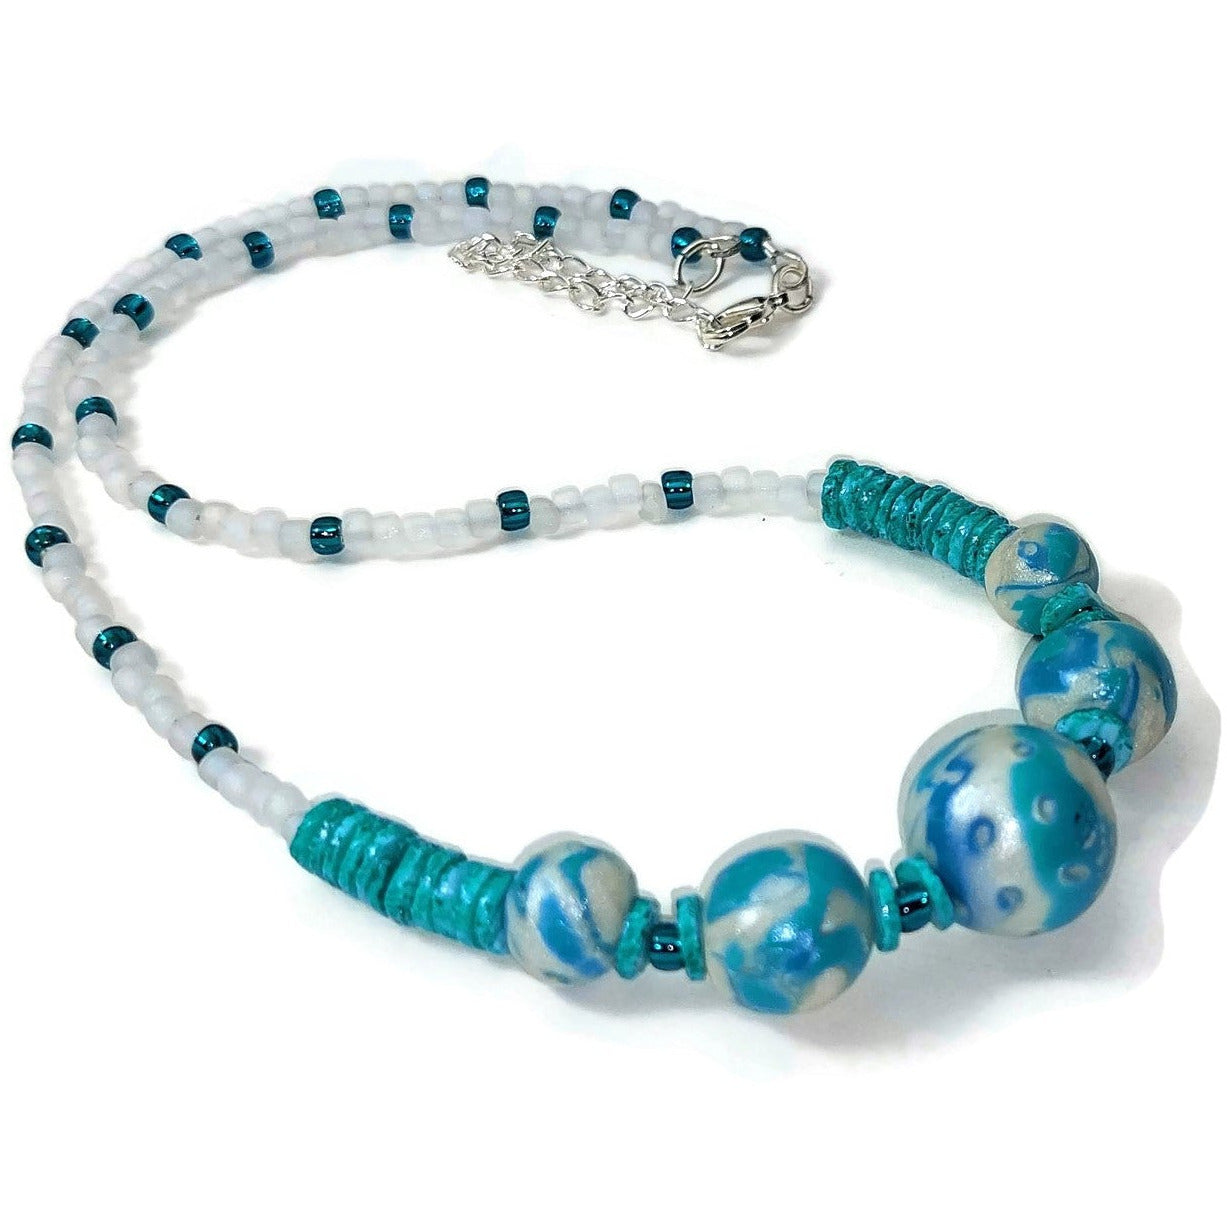 Polymer clay, glass, and howlite gemstone bead necklace with sterling silver lobster clasp on white background